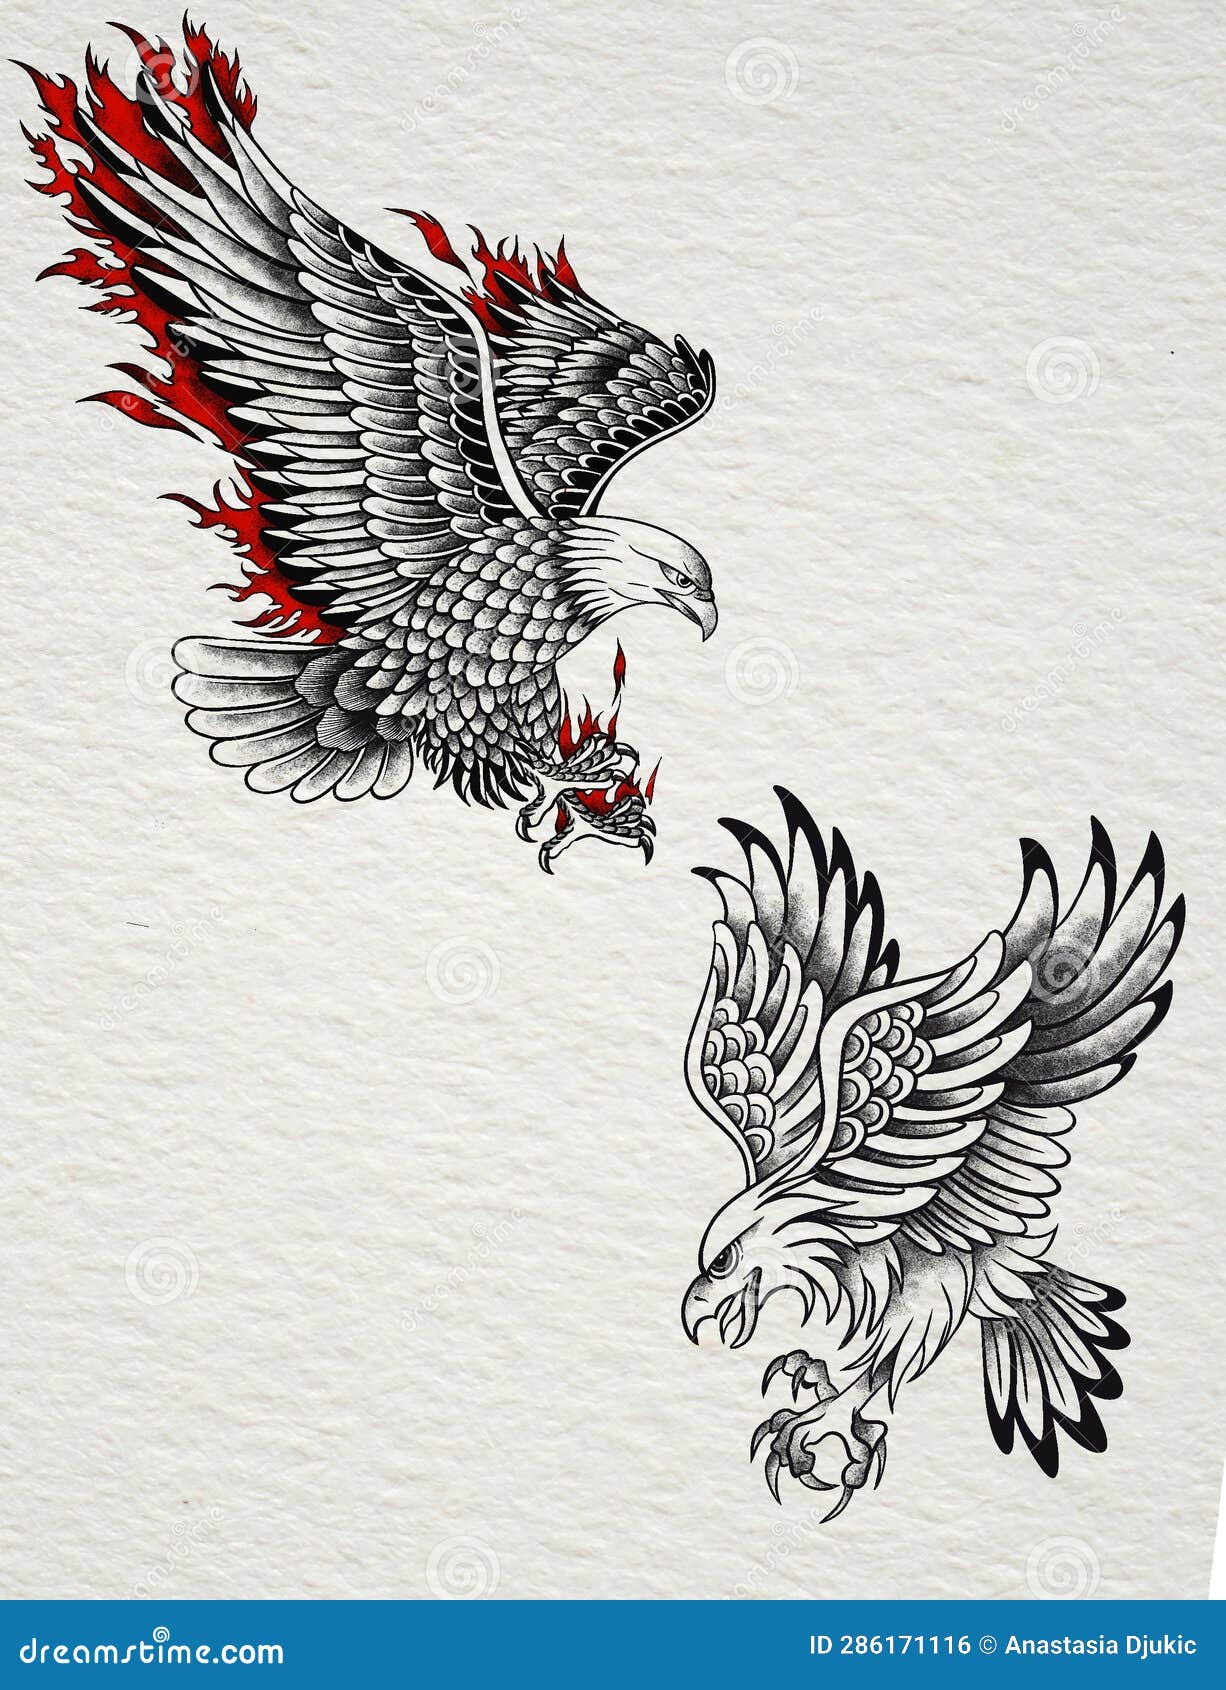 Retro style large flower arm bald eagle pattern temporary waterproof tattoo  stickers party men tattoo stickers